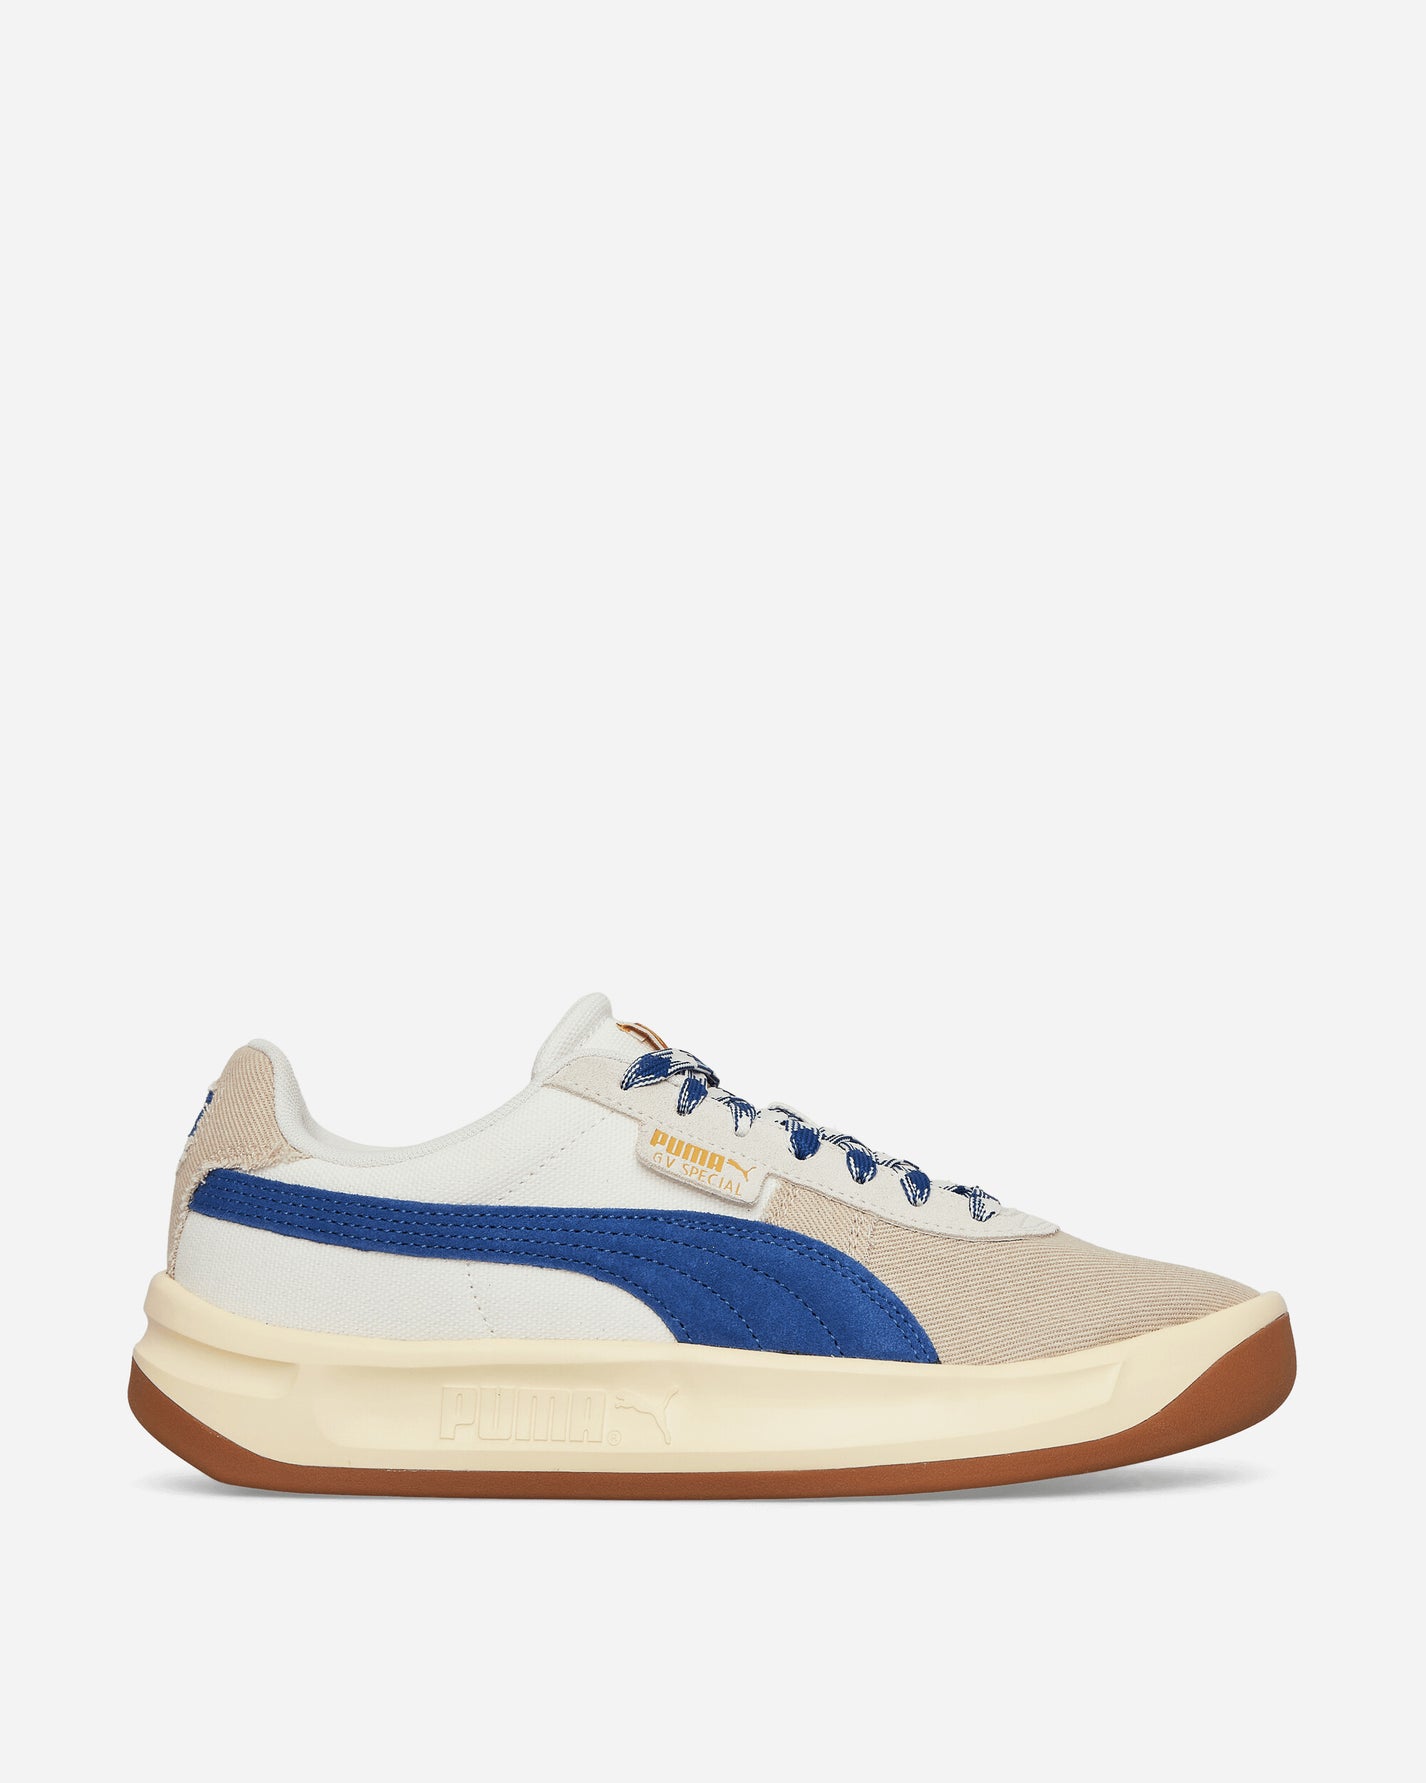 Puma Gv Special Warm White/Clyde Ro Sneakers Low 398632-01